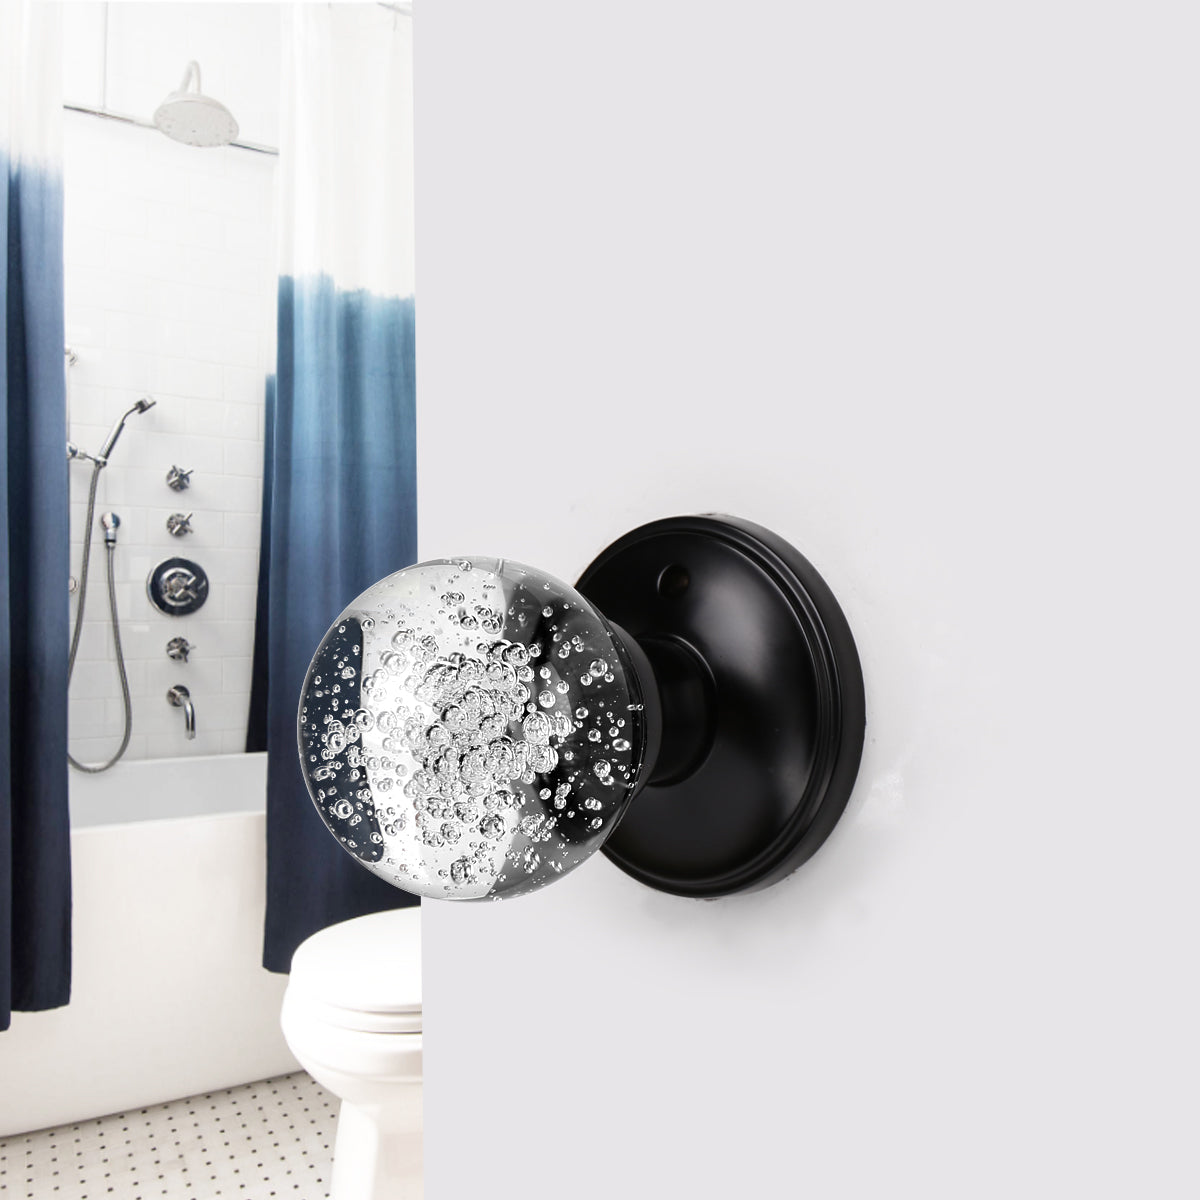 Crystal Glass Door Knobs in Round Ball Style, Privacy Knob, Black Finish DLC23BOBKBK